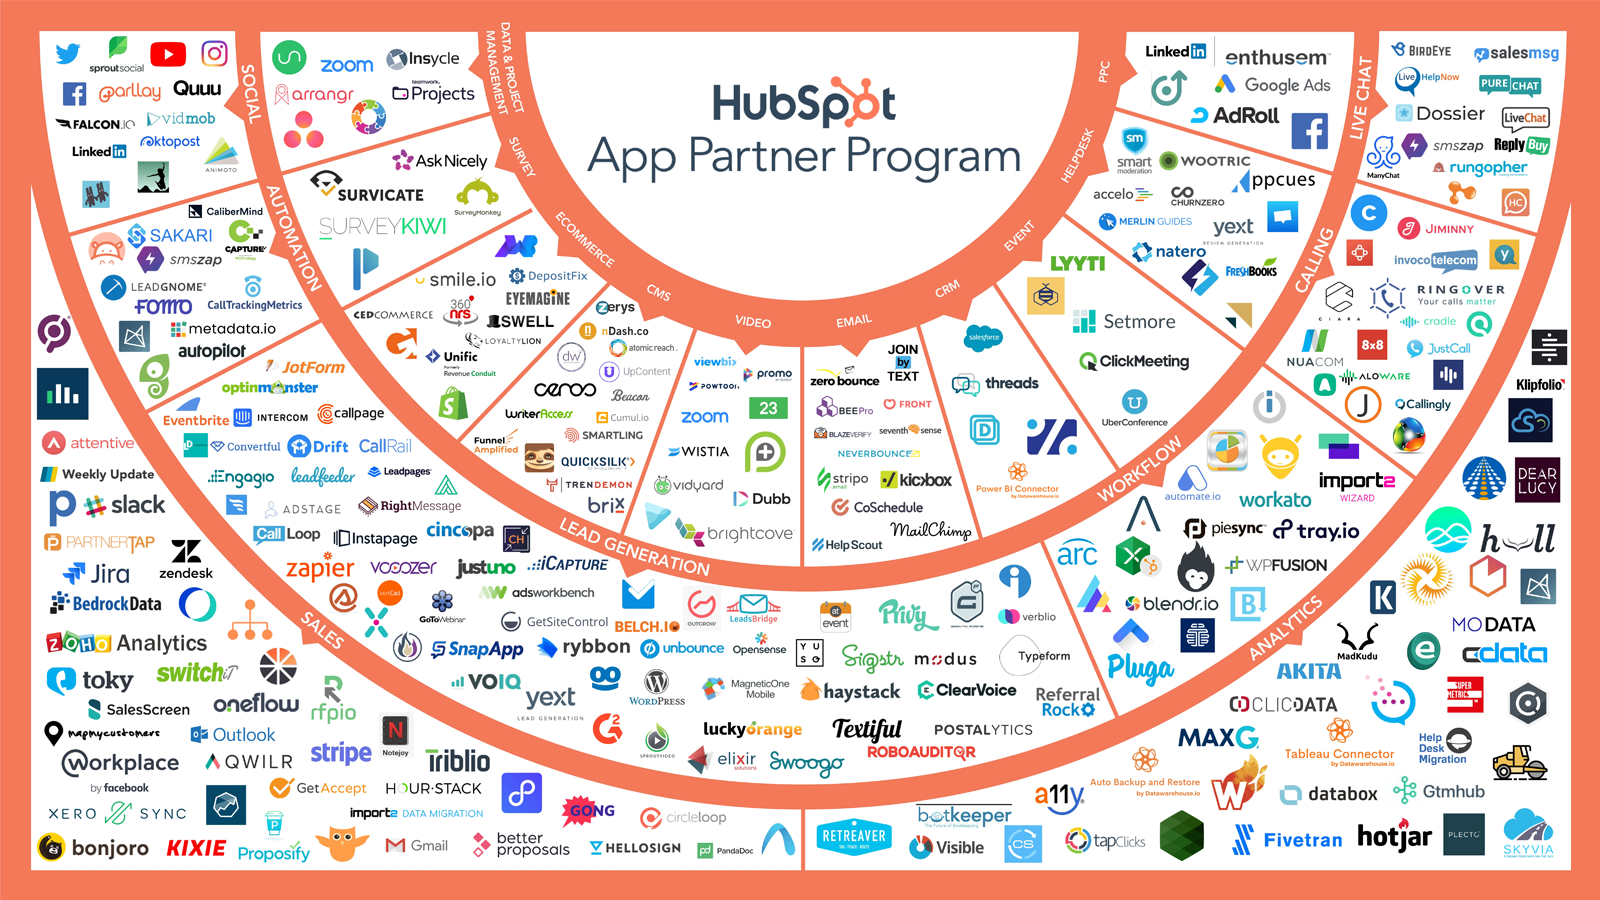 Connect your favorite tools to Hubspot